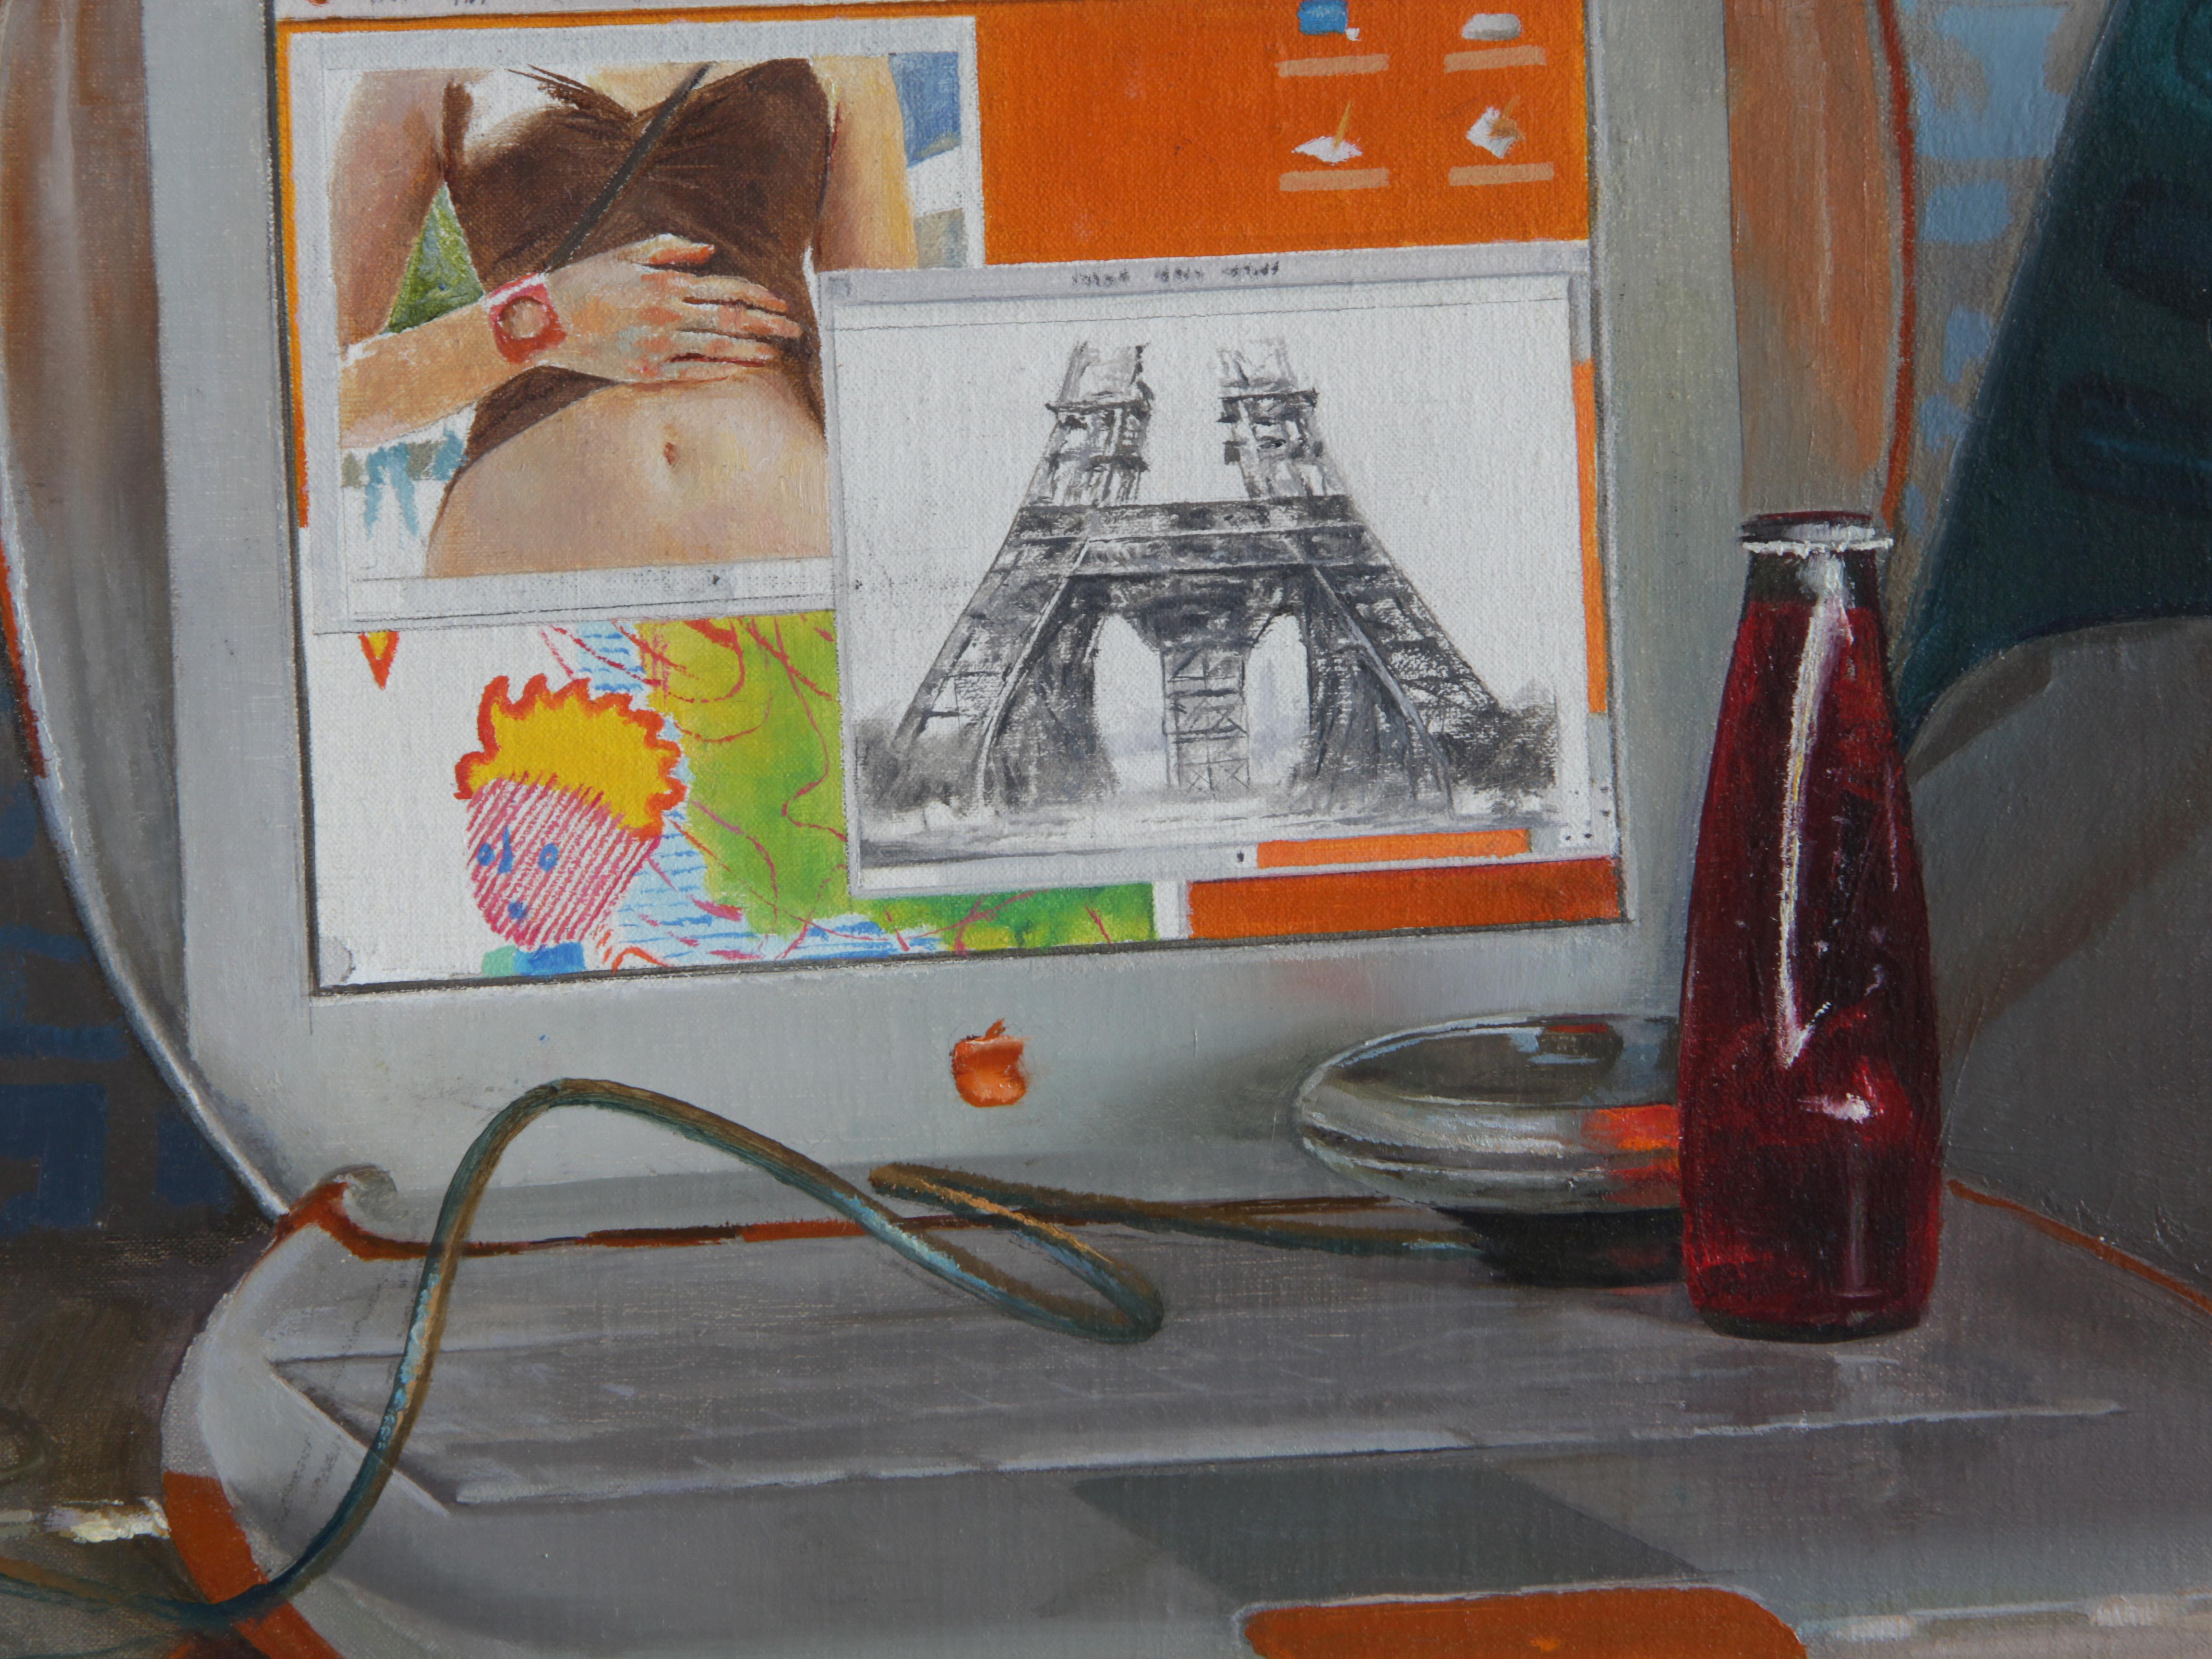 This still life painting on canvas captures a variety of objects. Among the objects depicted are: Mac Computer, Coke Bottle, doll fragment on top of a bottled water, and a printed fabric background. These masterfully painted objects create a tableau